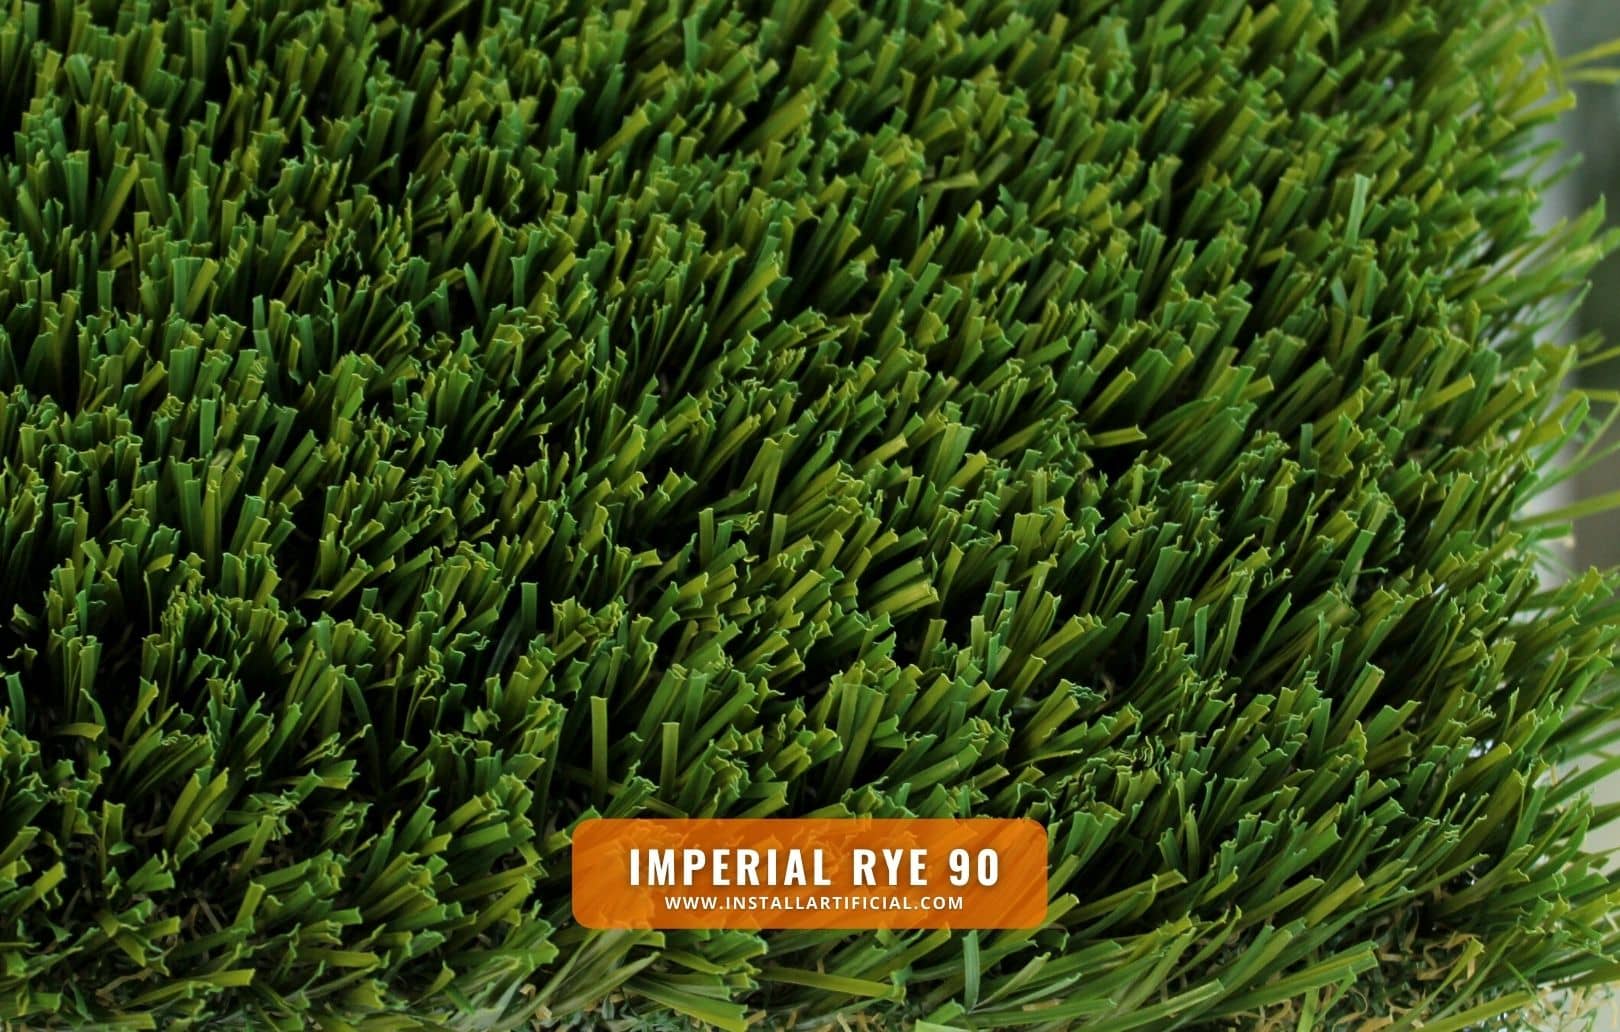 Imperial Rye 90, Imperial Synthetic Turf, top